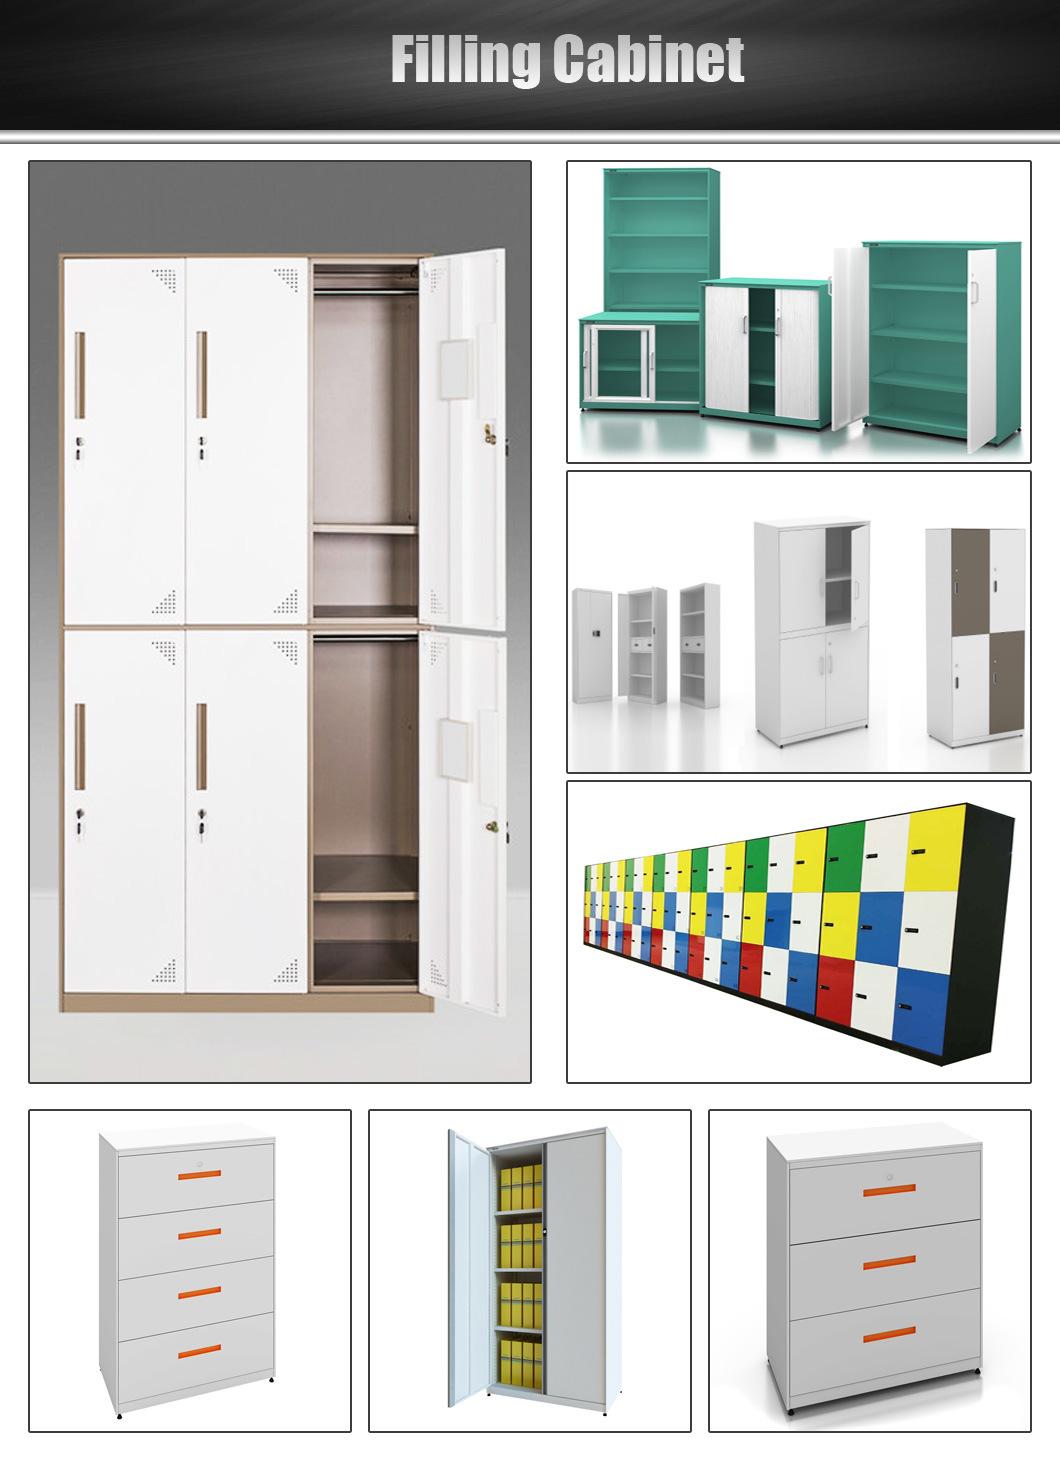 Clients First Work Storage Cabinets with Environmentally-Friendly Materials